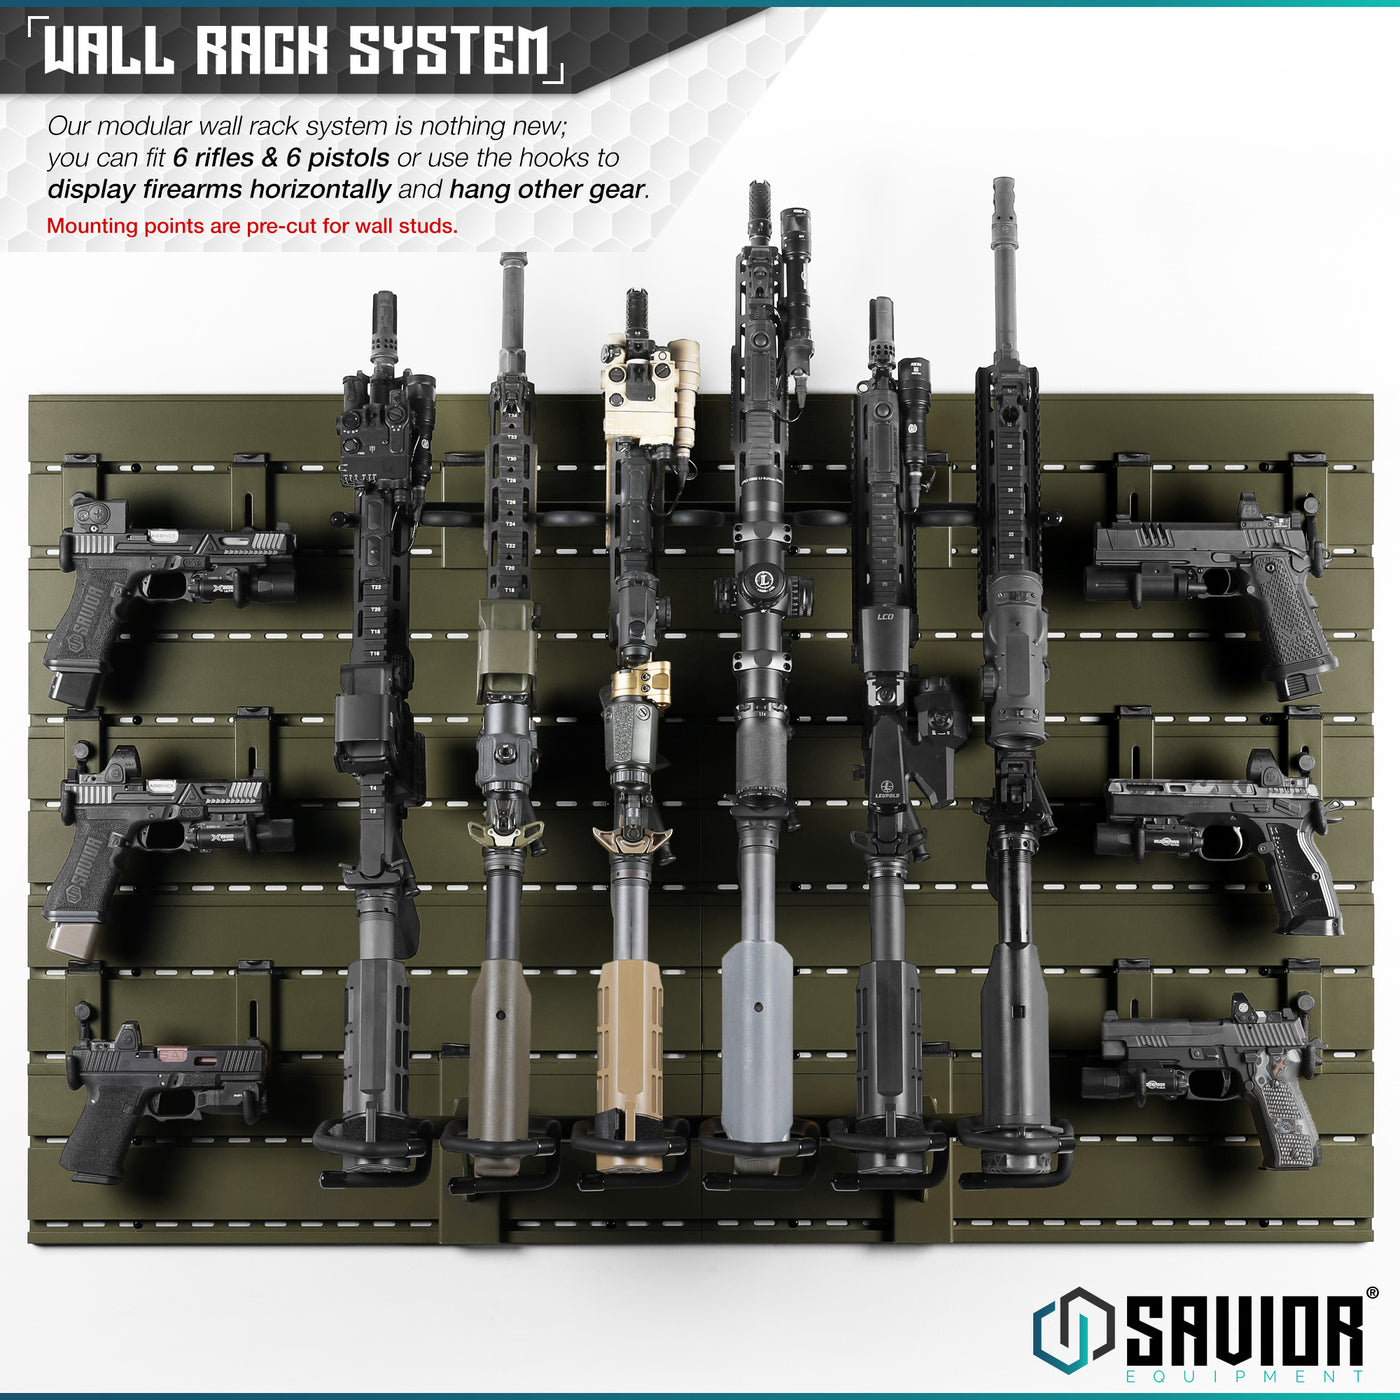 Wall Rack System - Our modular wall rack system is nothing new; you can fit up to 6 rifles & 6 pistols or use the hooks to display firearms horizontally and hang other gear. Mounting points are pre-cut for wall studs.